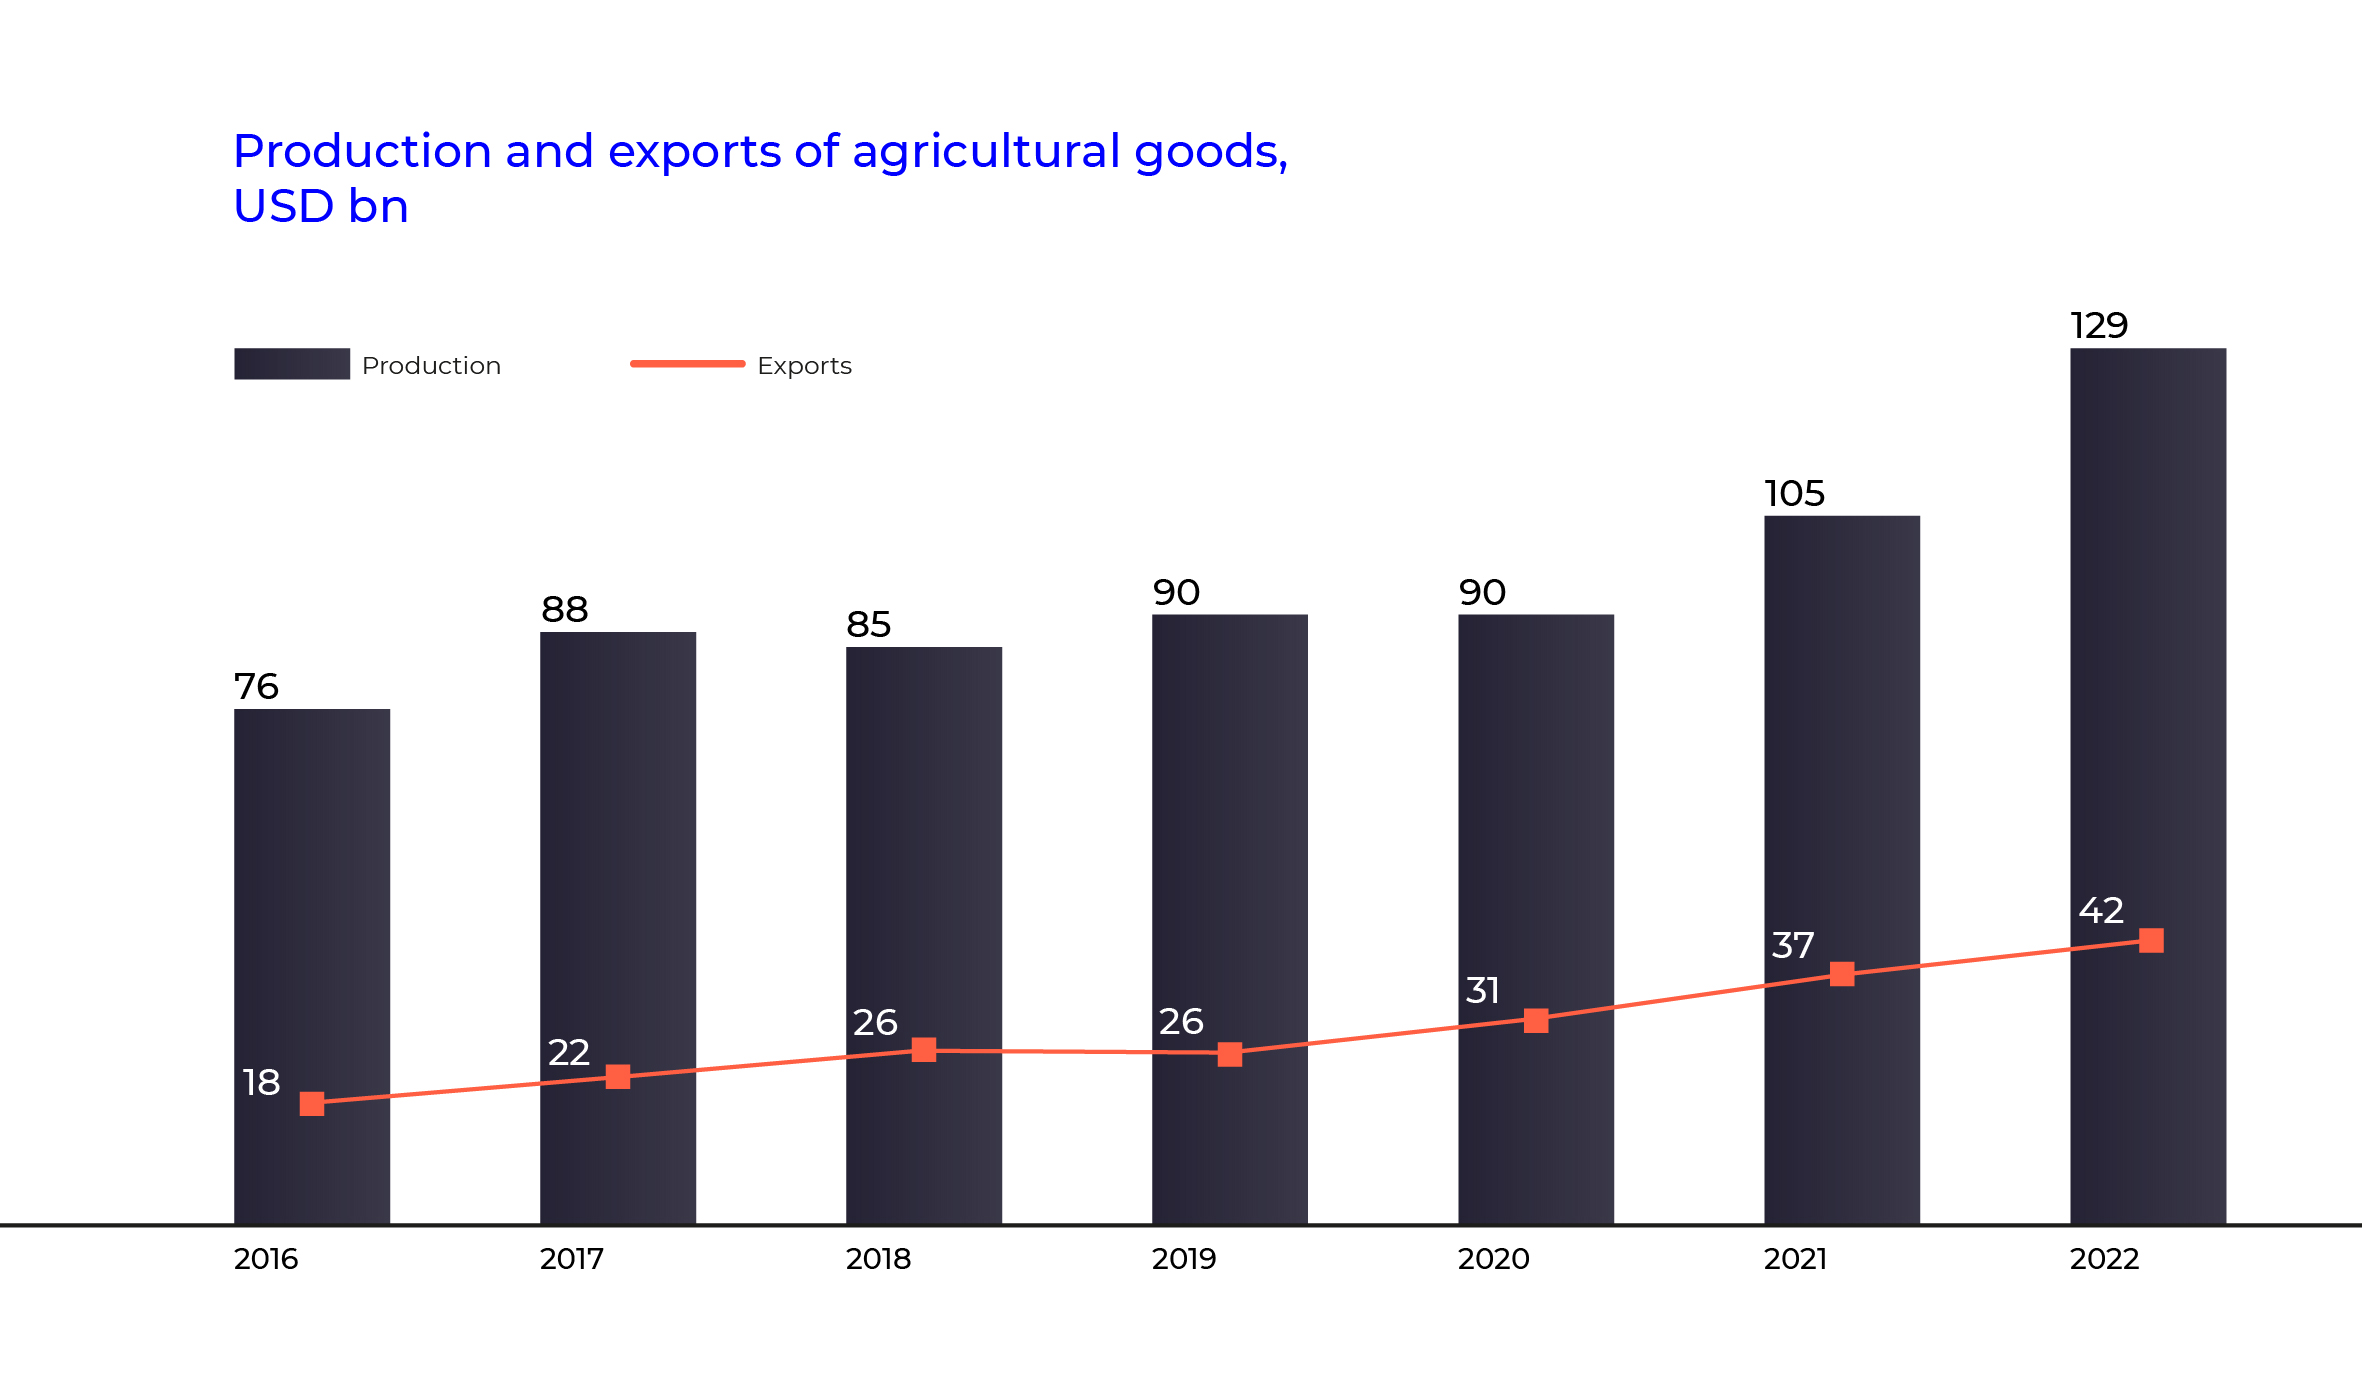 Production and exports of agricultural goods, USD bn